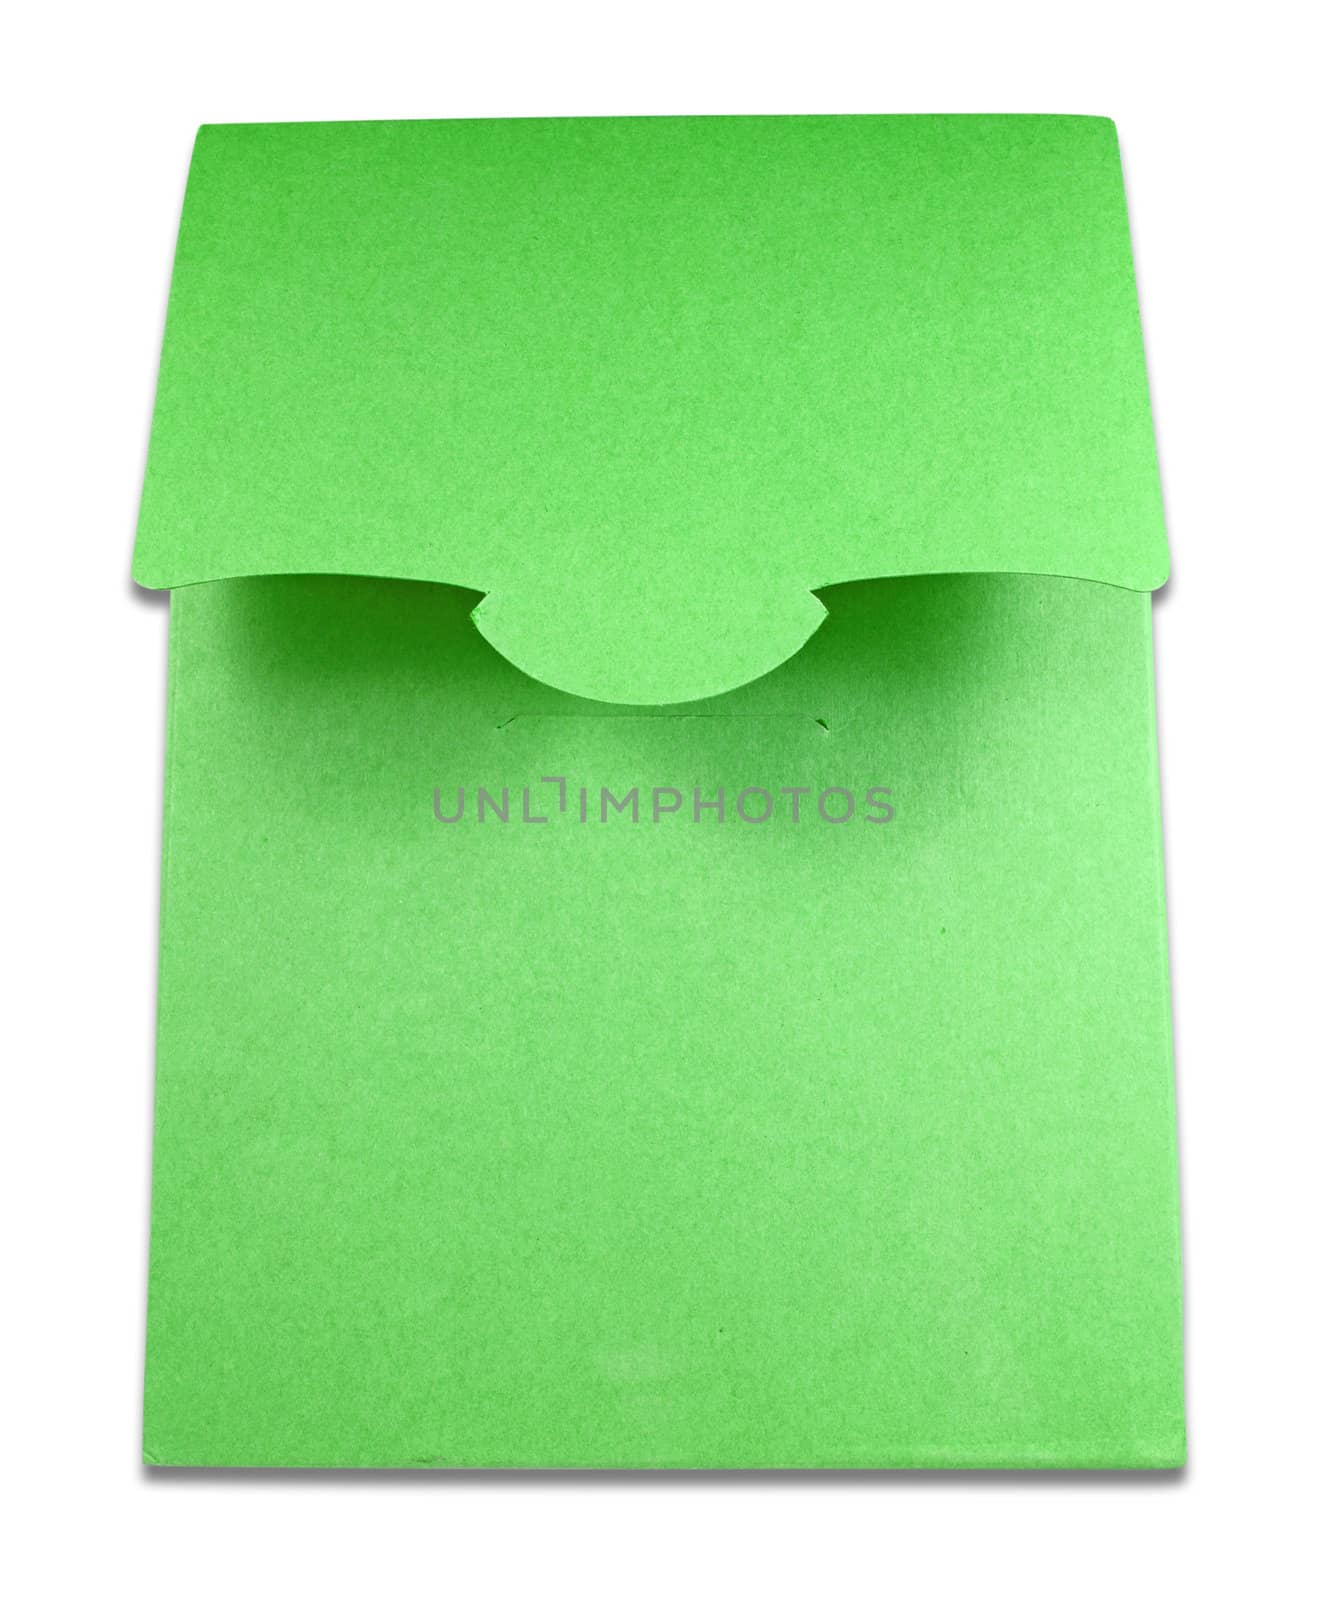 Blank package of green box isolated on white background